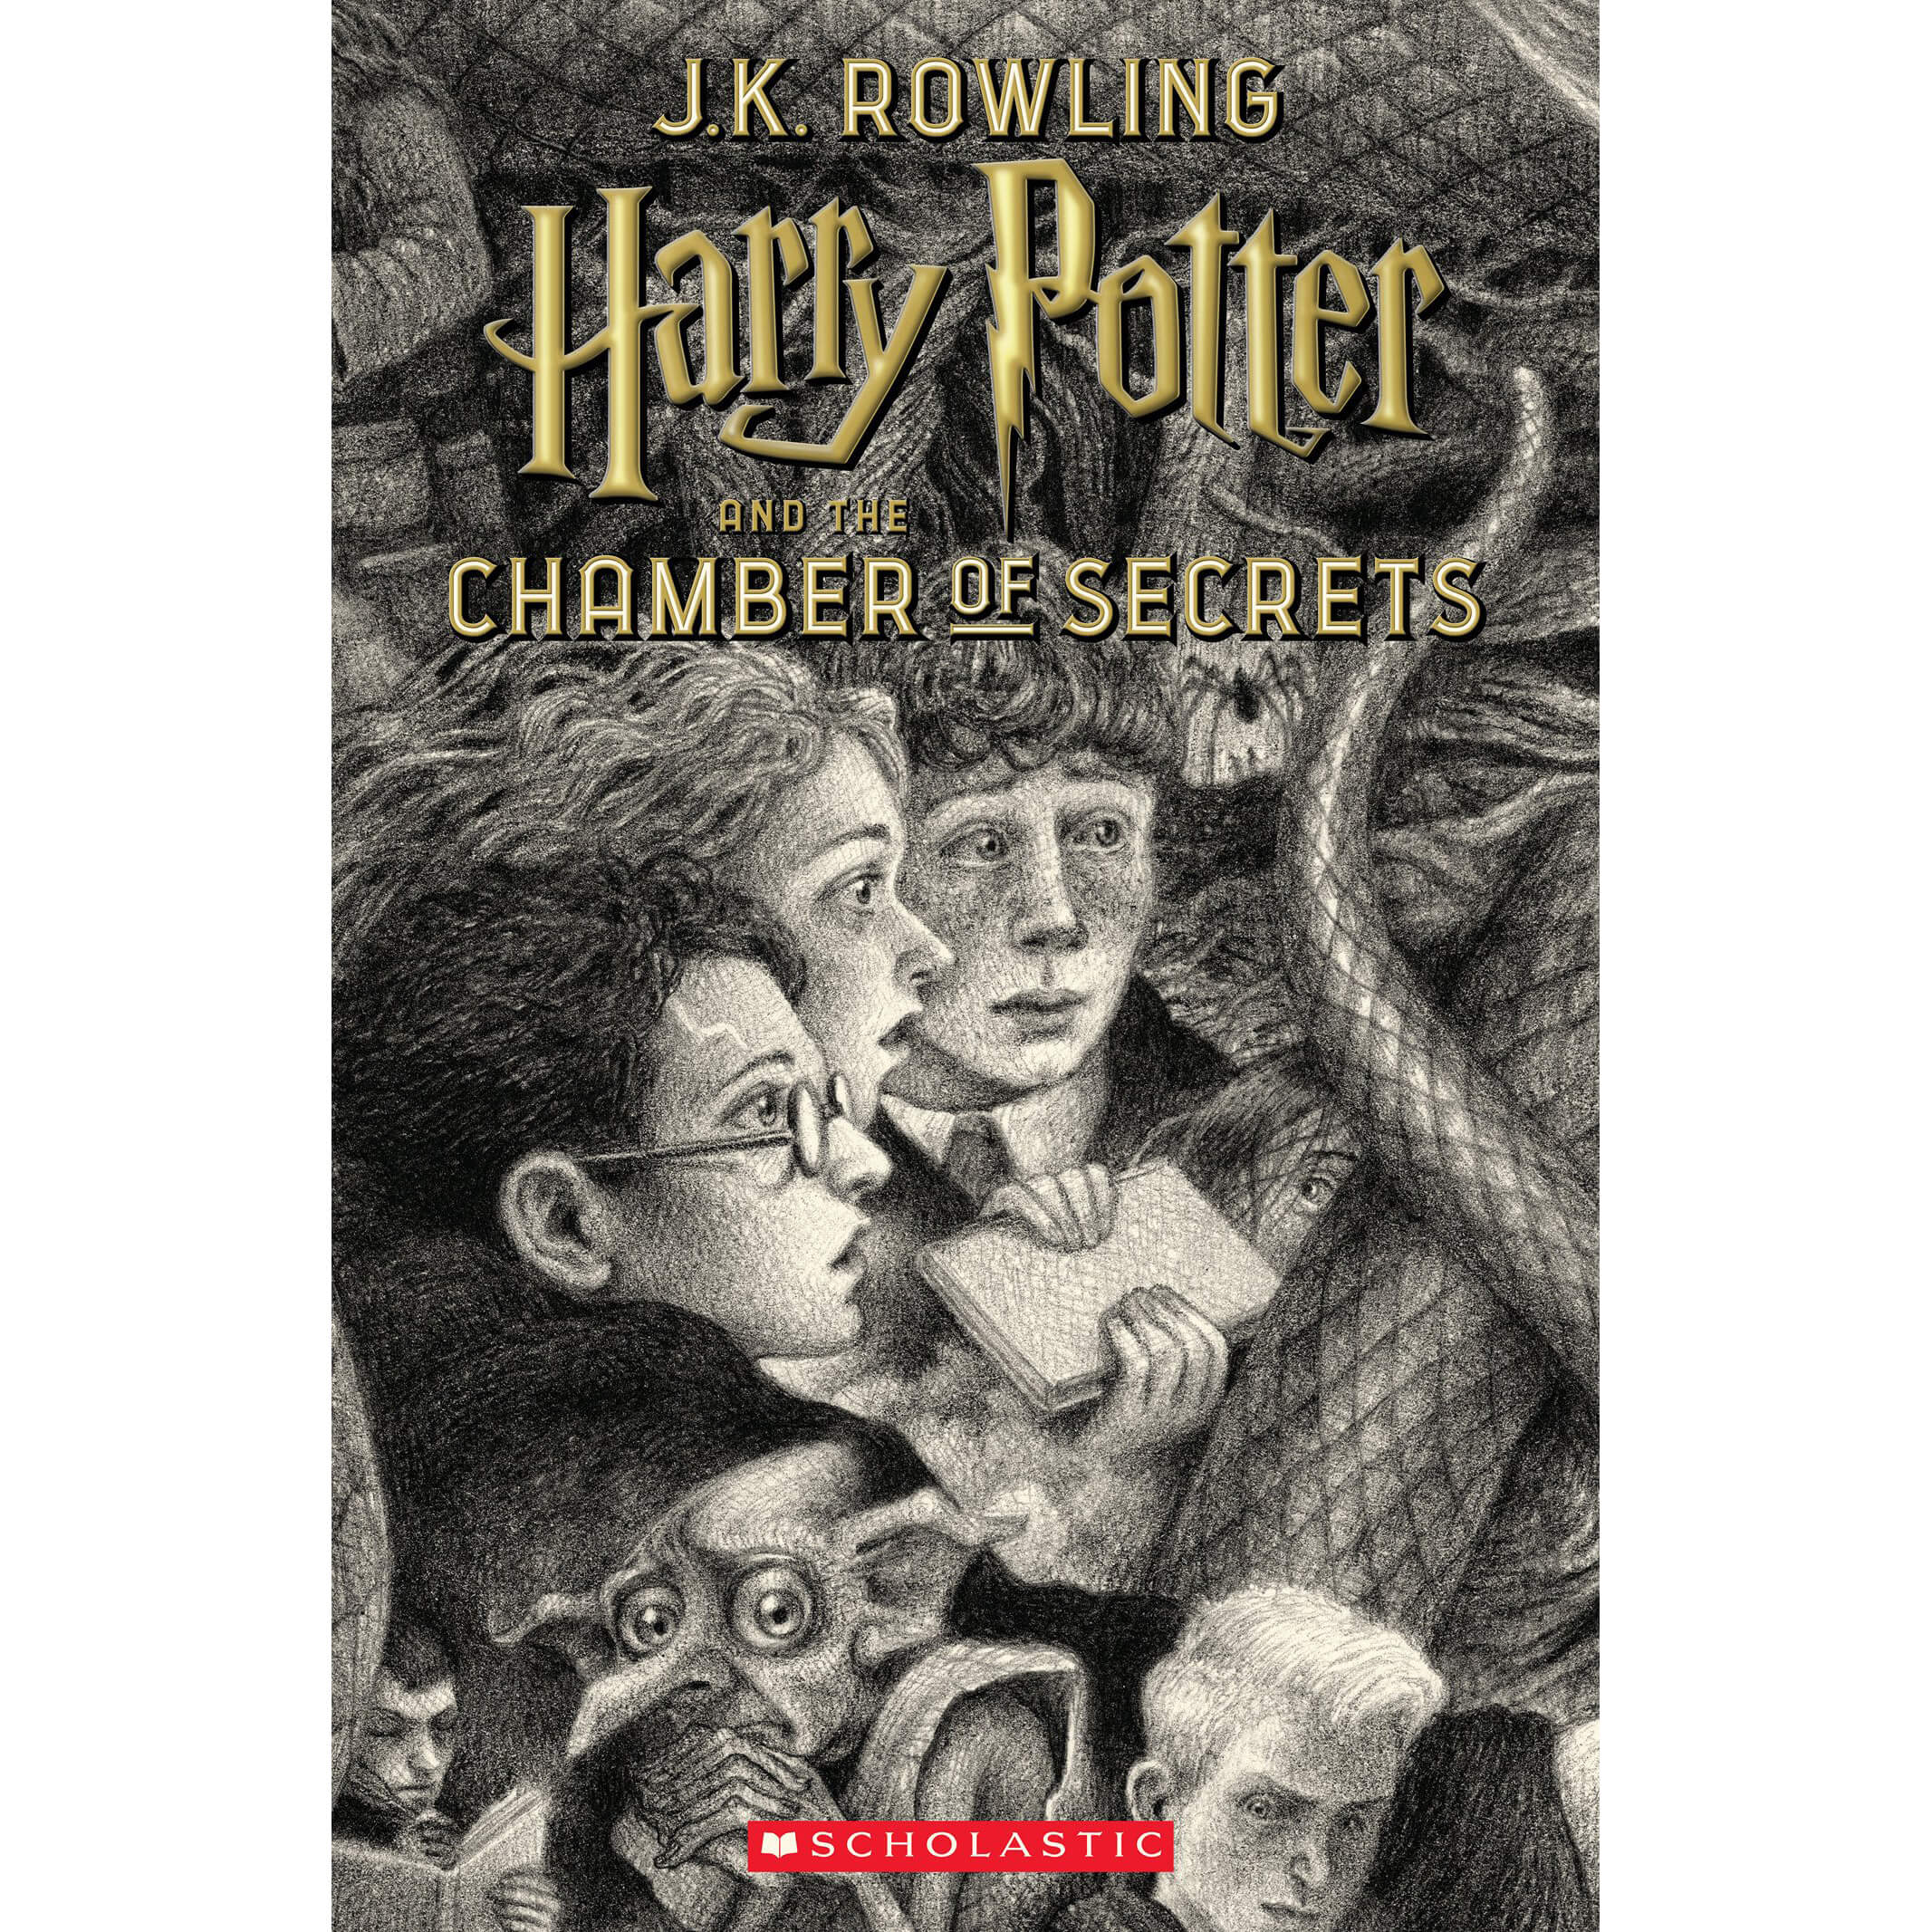 Harry Potter and the Chamber of Secrets 20th Anniversary Edition